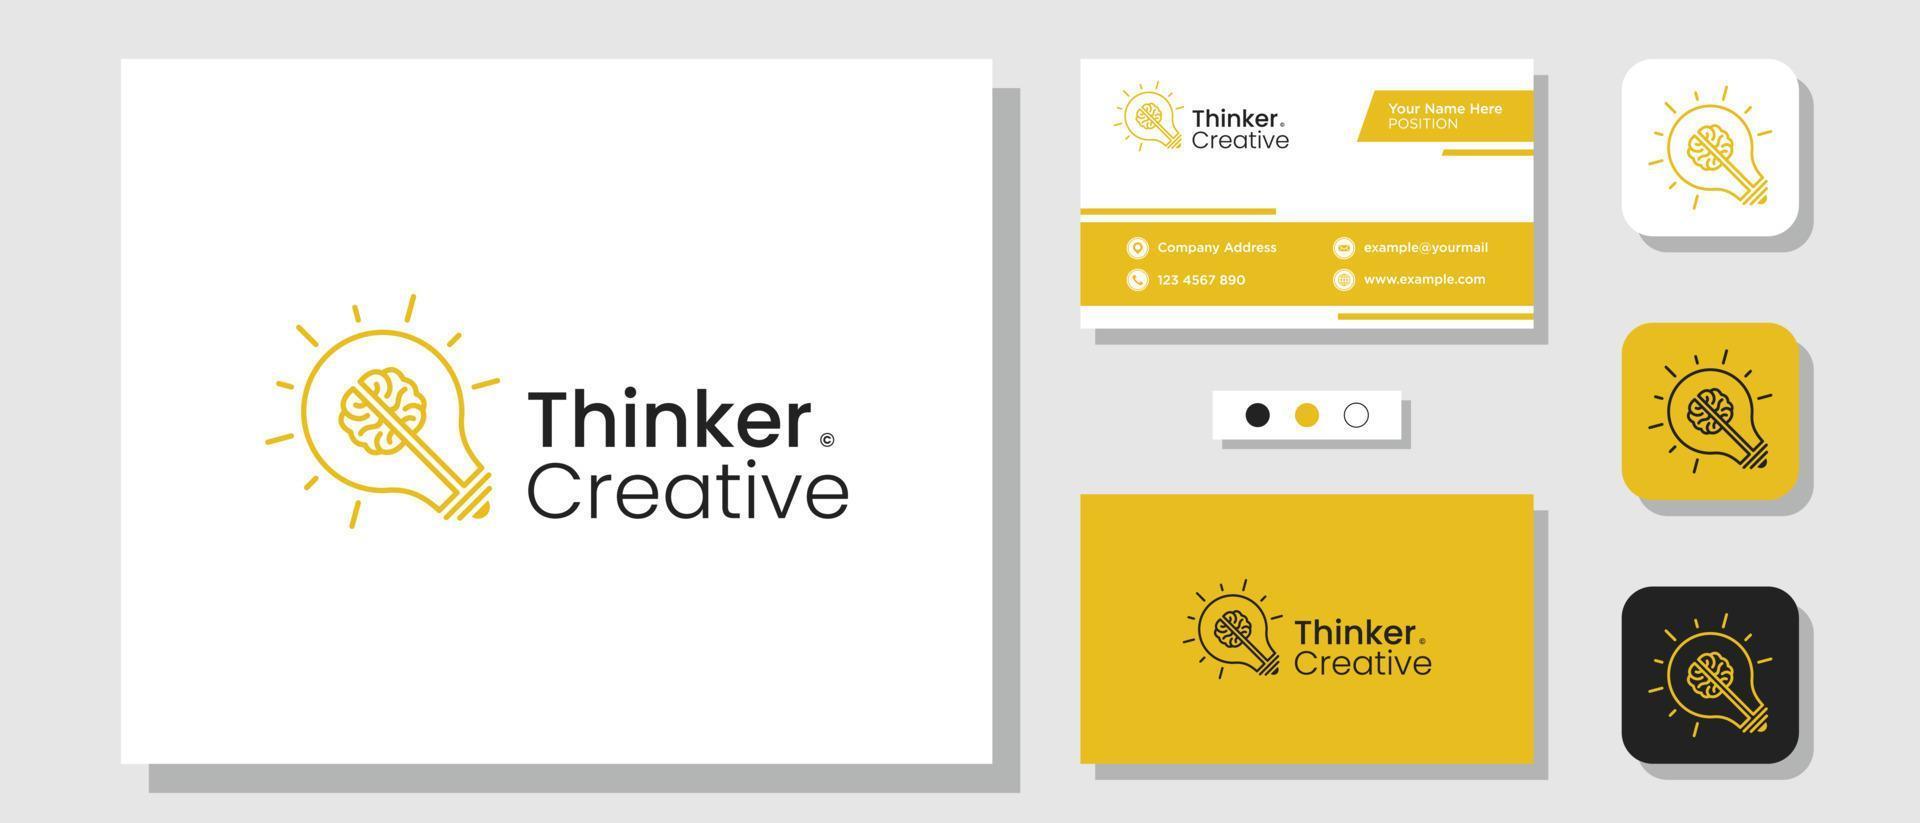 Creative Thinker Logo Design with Lightbulb And Brain, Layout Template Business Card vector